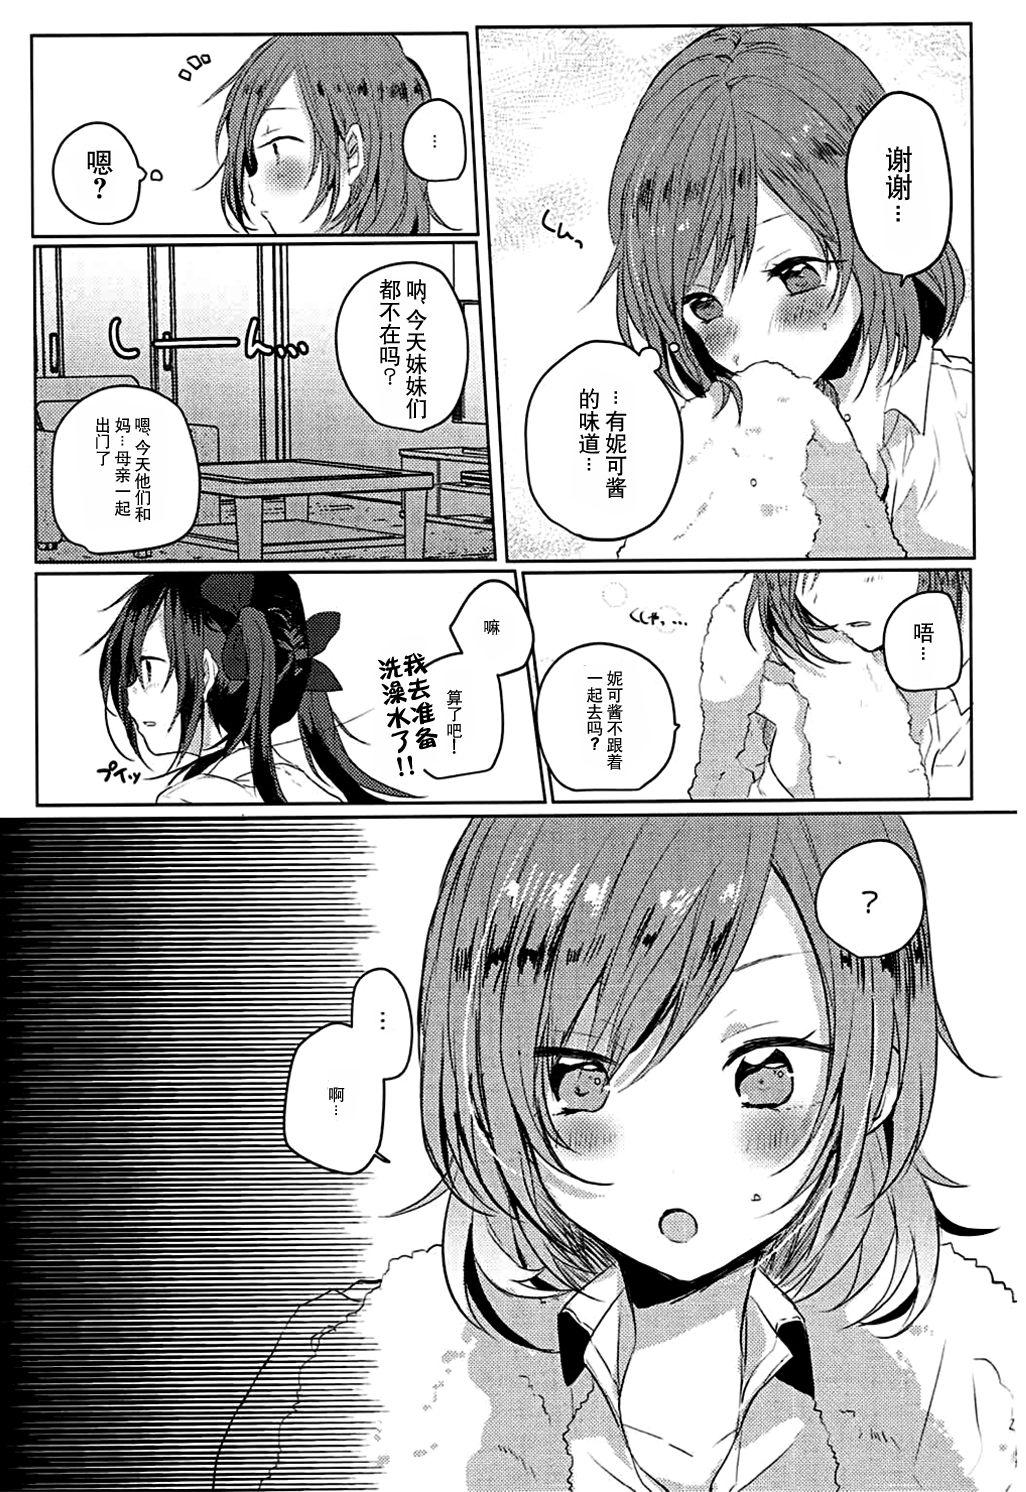 Bwc Houkago Bath Time - Love live Pay - Page 4